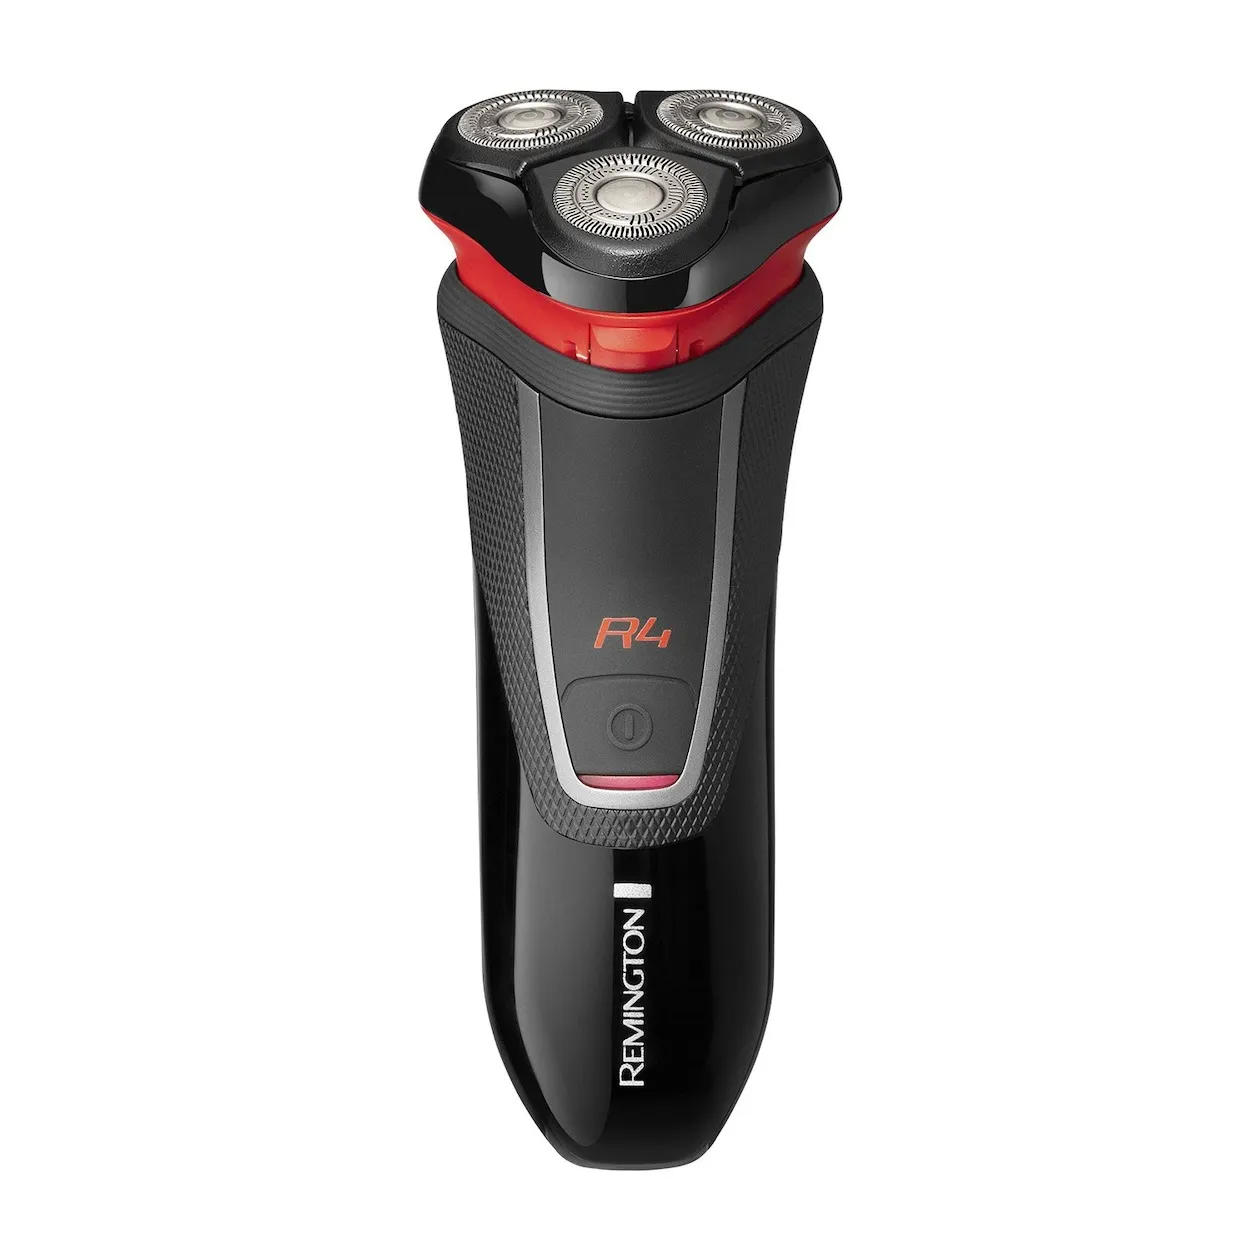 Remington STYLE SERIES ROTARY SHAVER R4